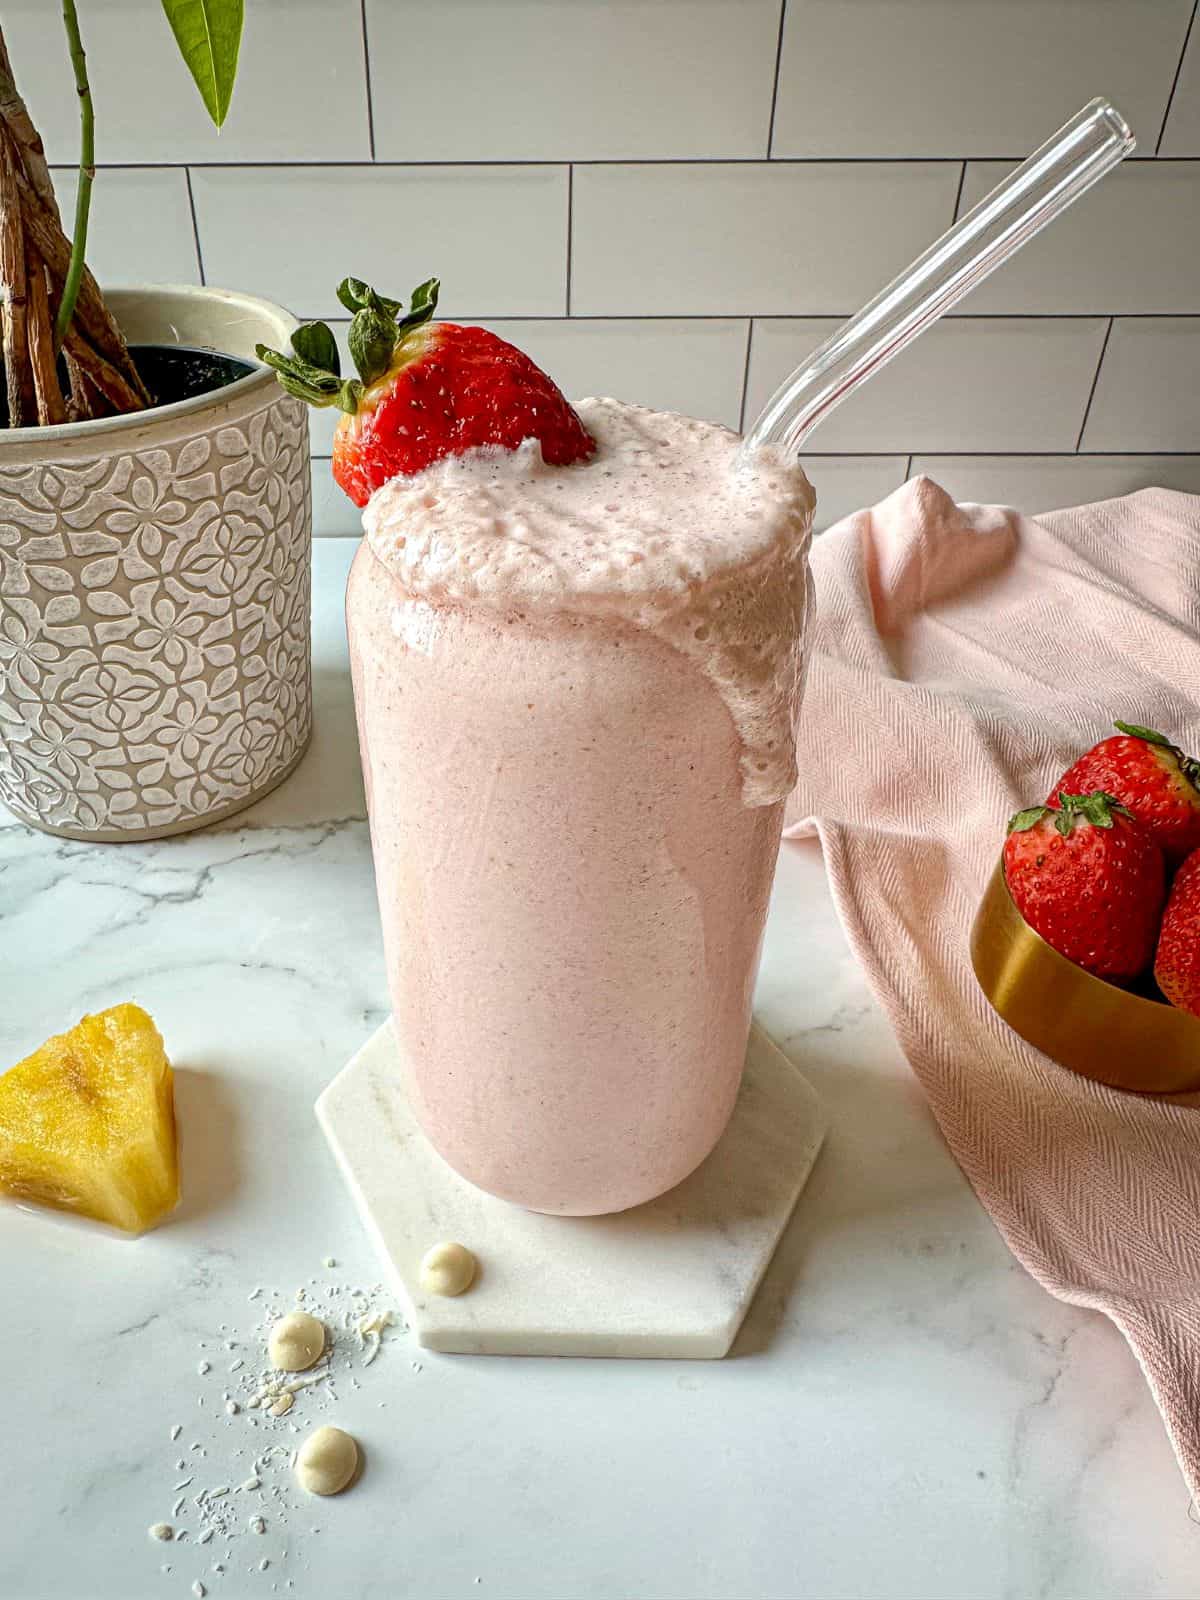 A pink Bahama mama tropical smoothie in a glass with a strawberry garnish on top. Pineapples, strawberries, white chocolate chips, and shredded coconut around the glass.